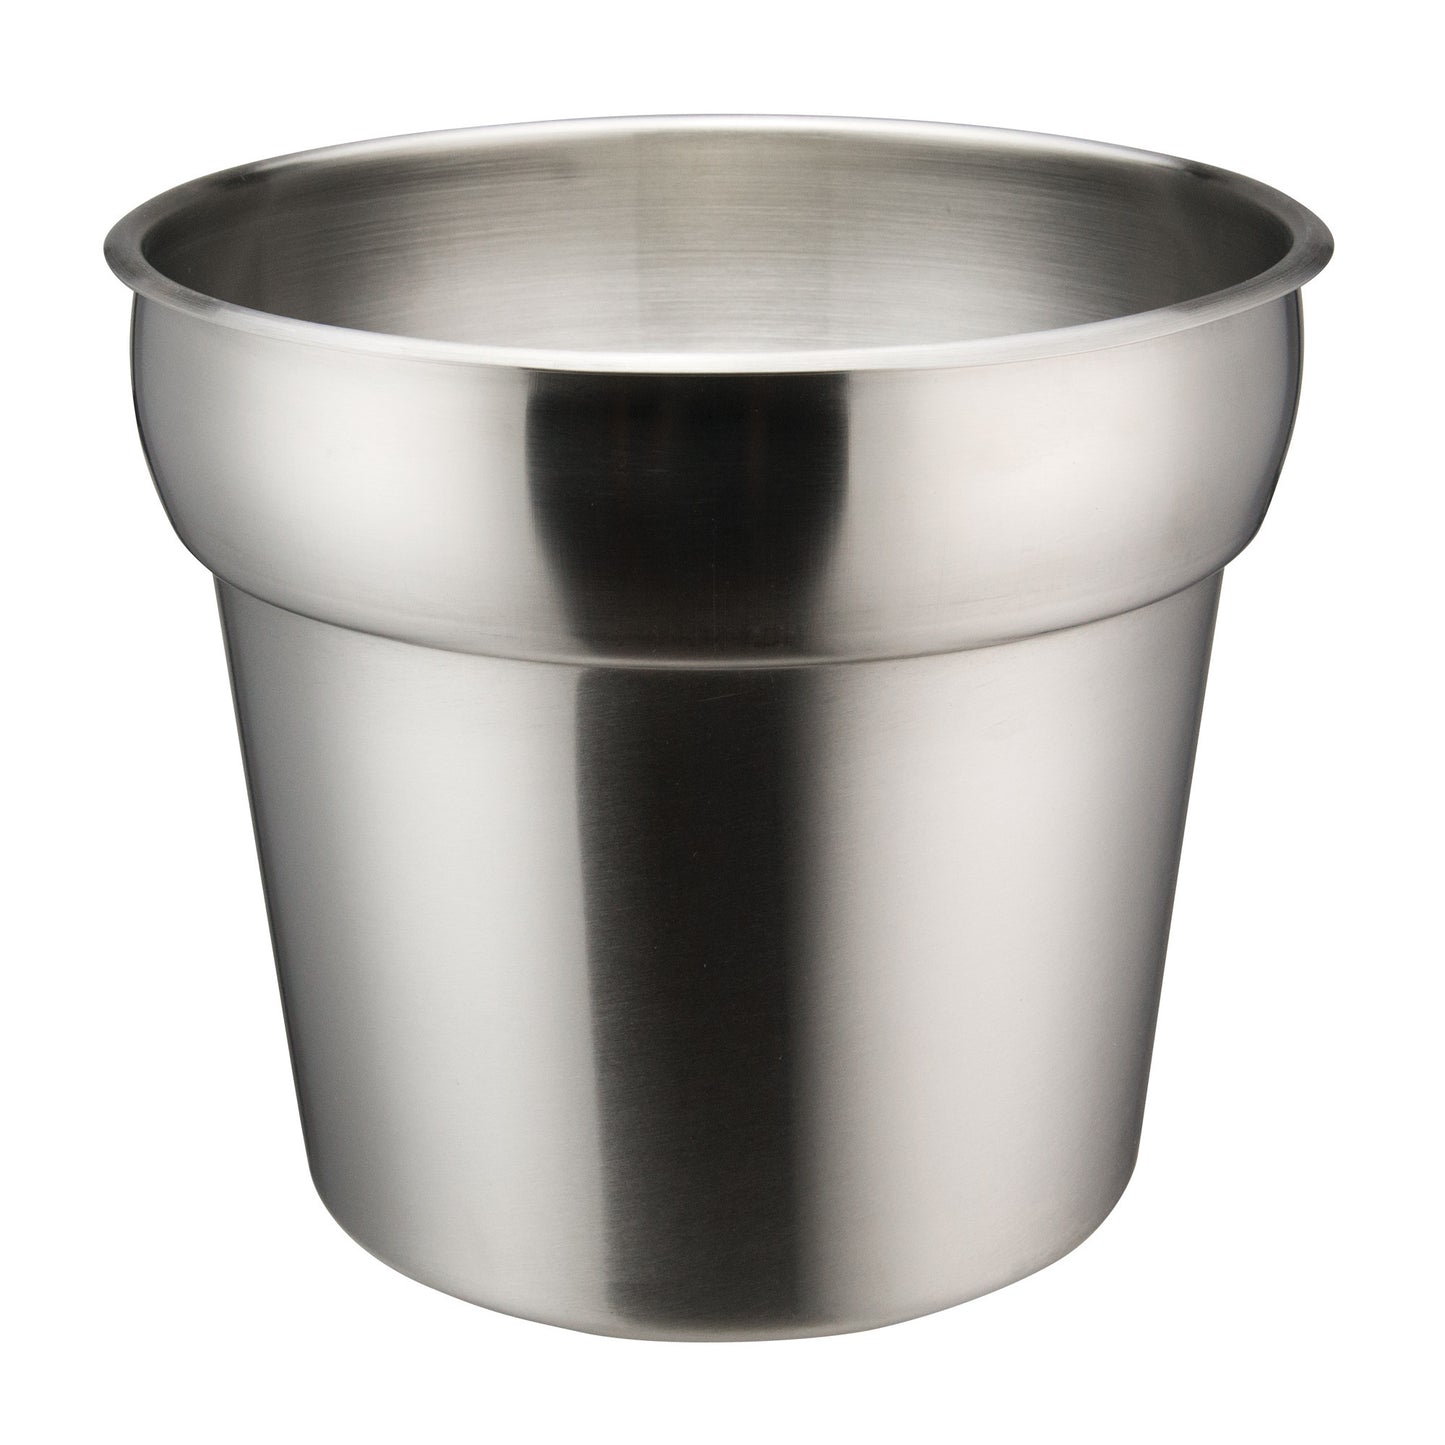 INSN-7 - Winco Prime Stainless Steel Inset - 7 Quart